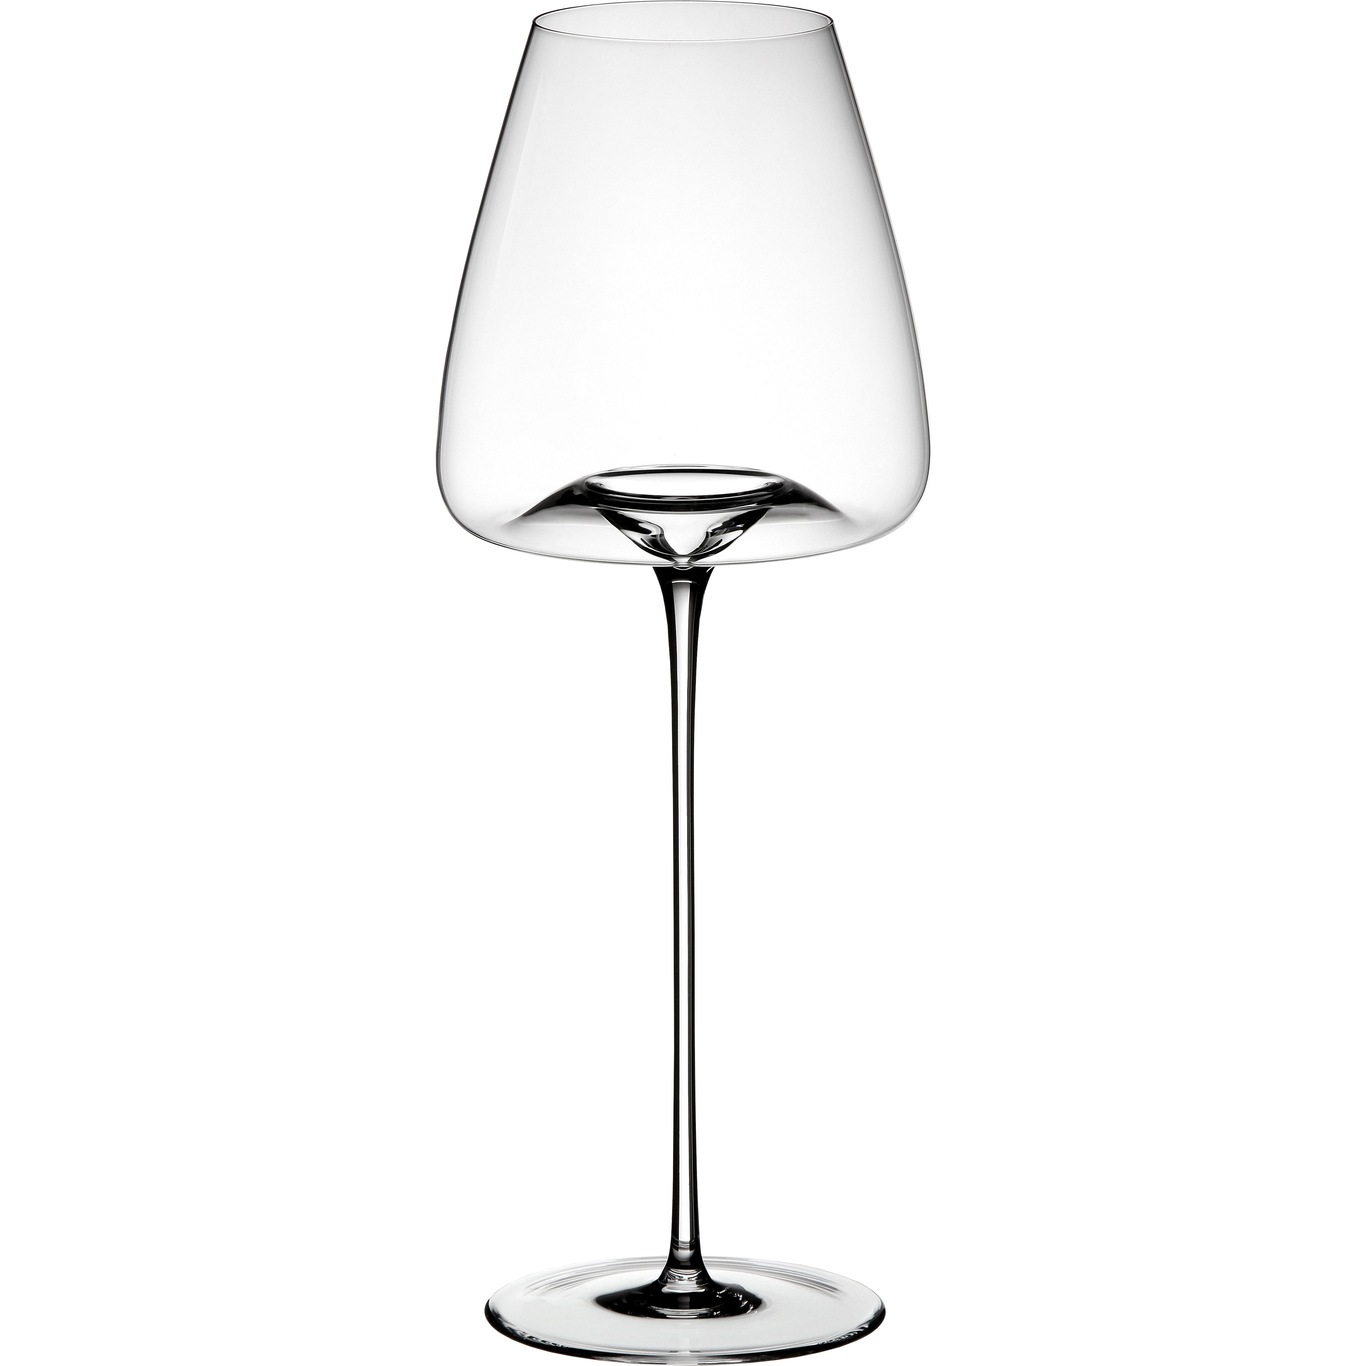 Vision Intense Wine Glass 2-pack